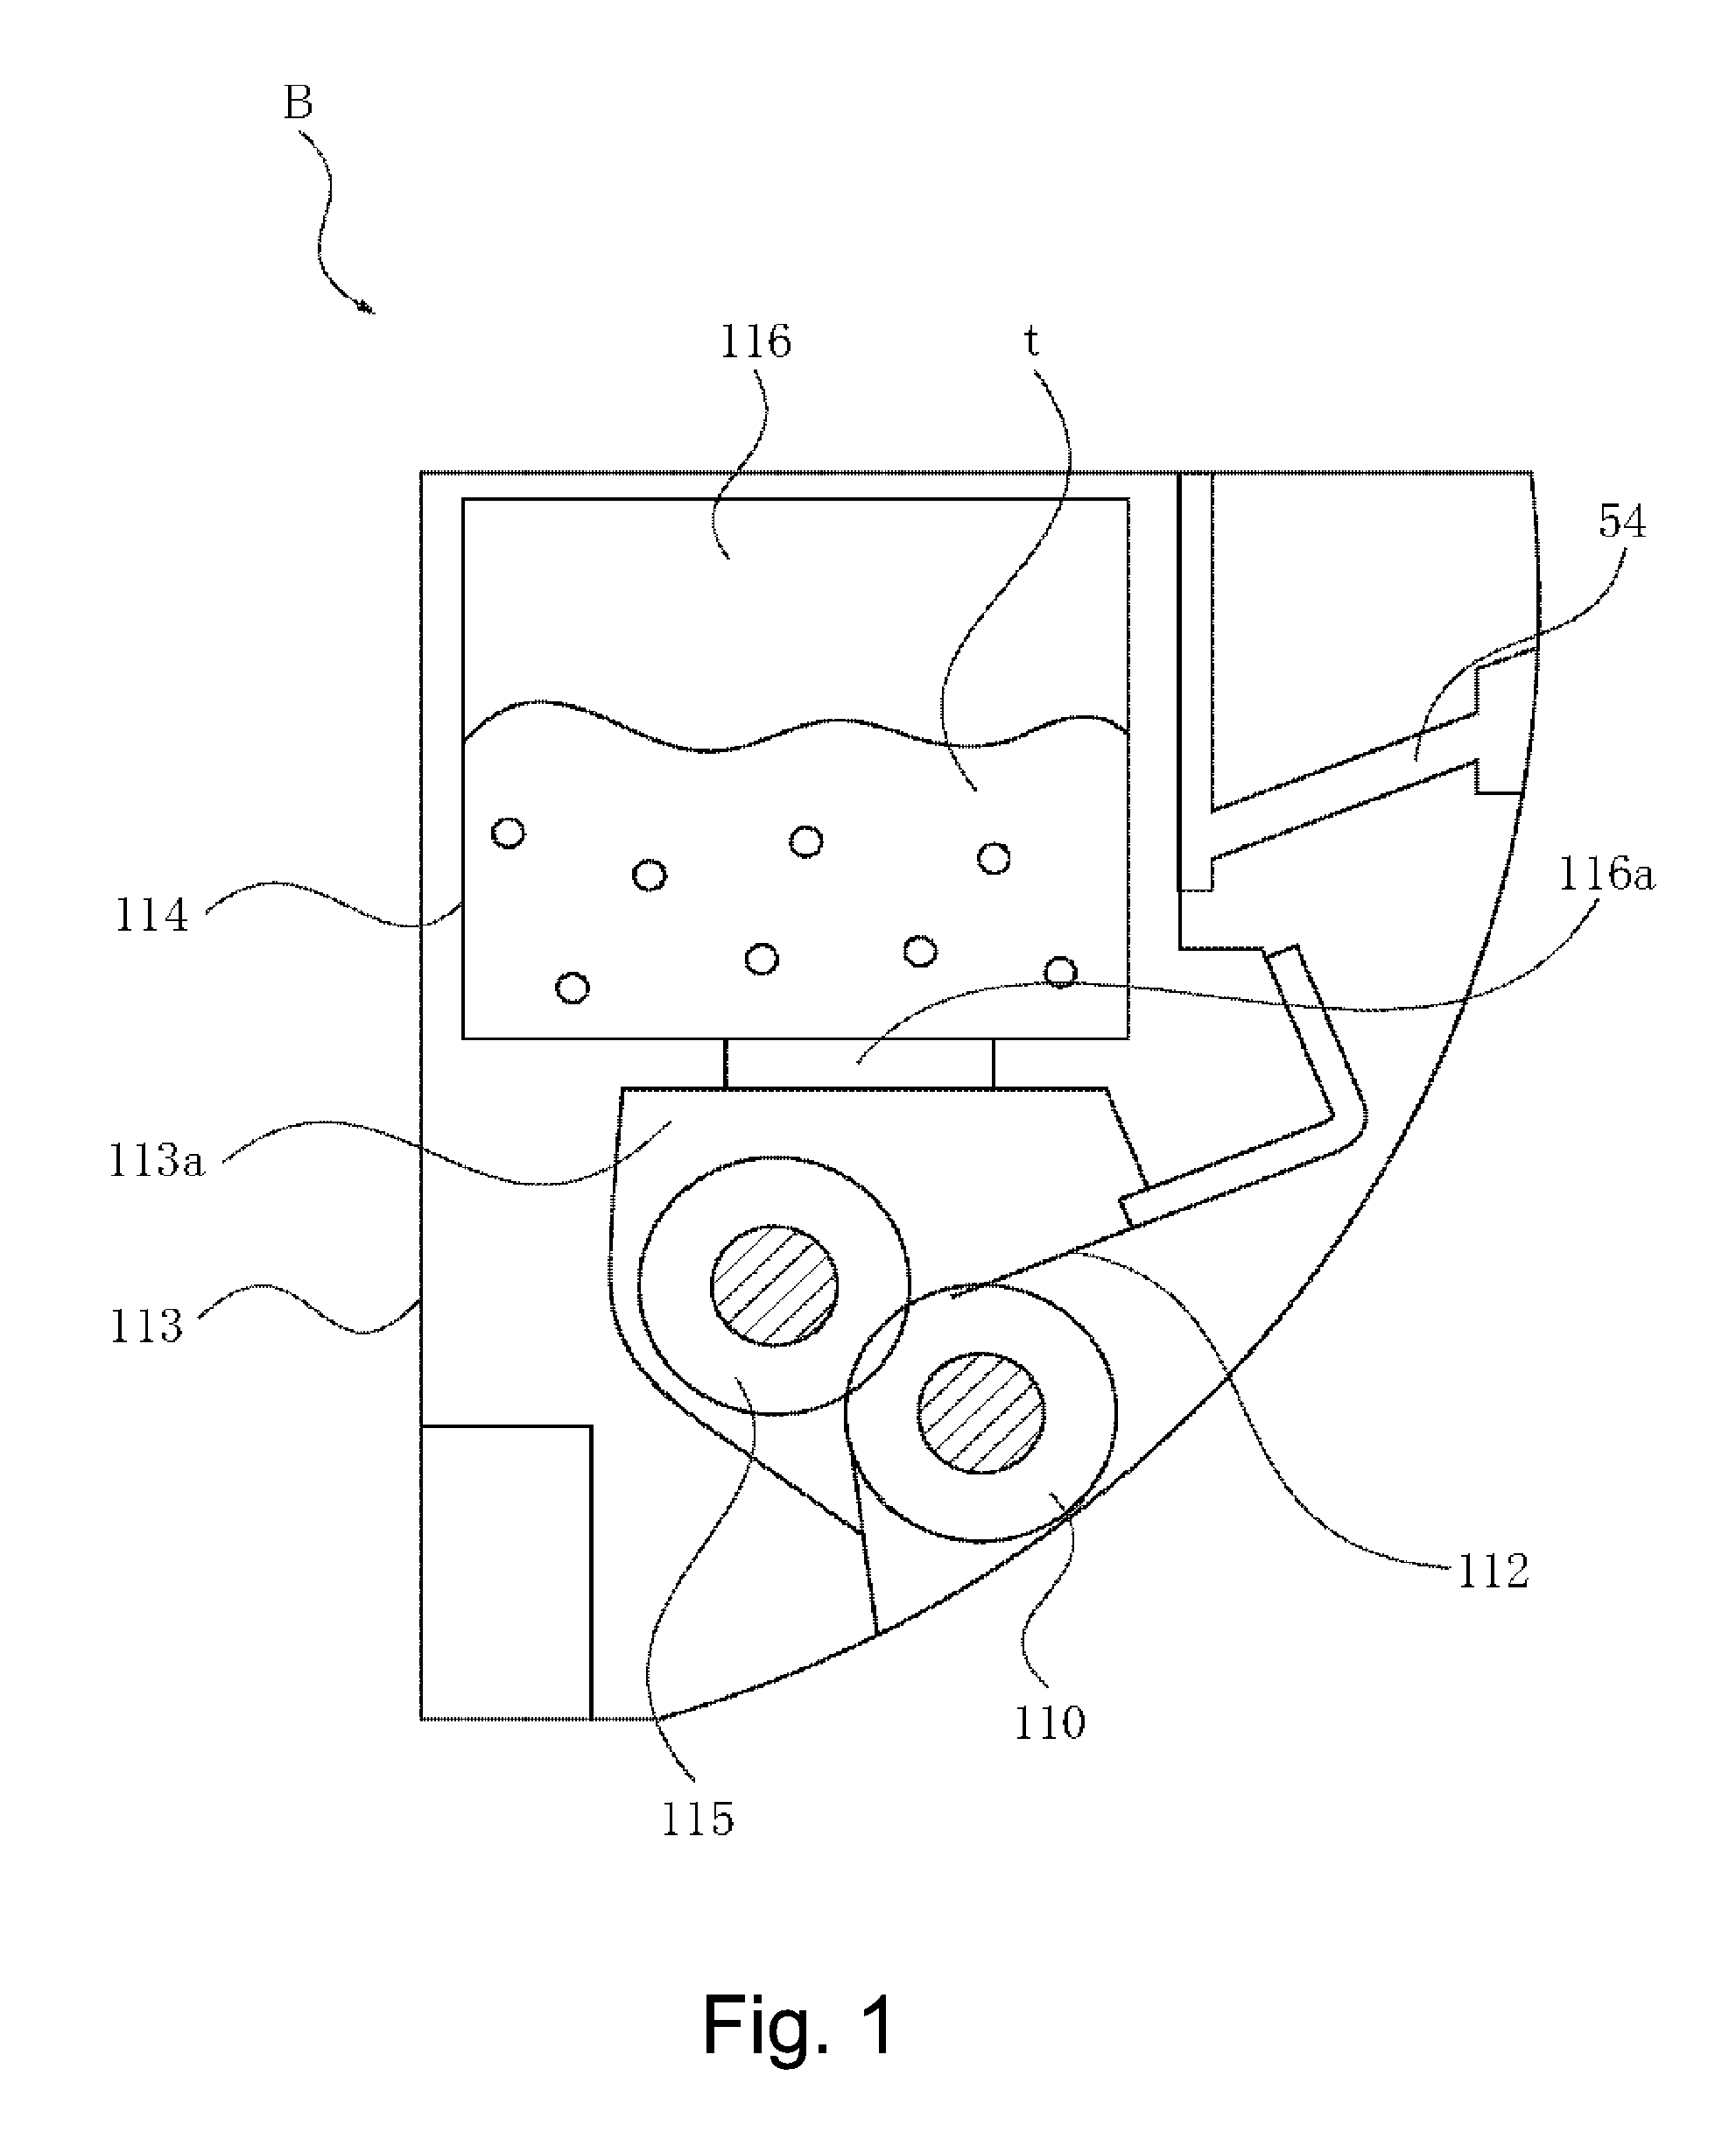 Developing device having movable coupling member for engagement to electrophotographic image forming apparatus